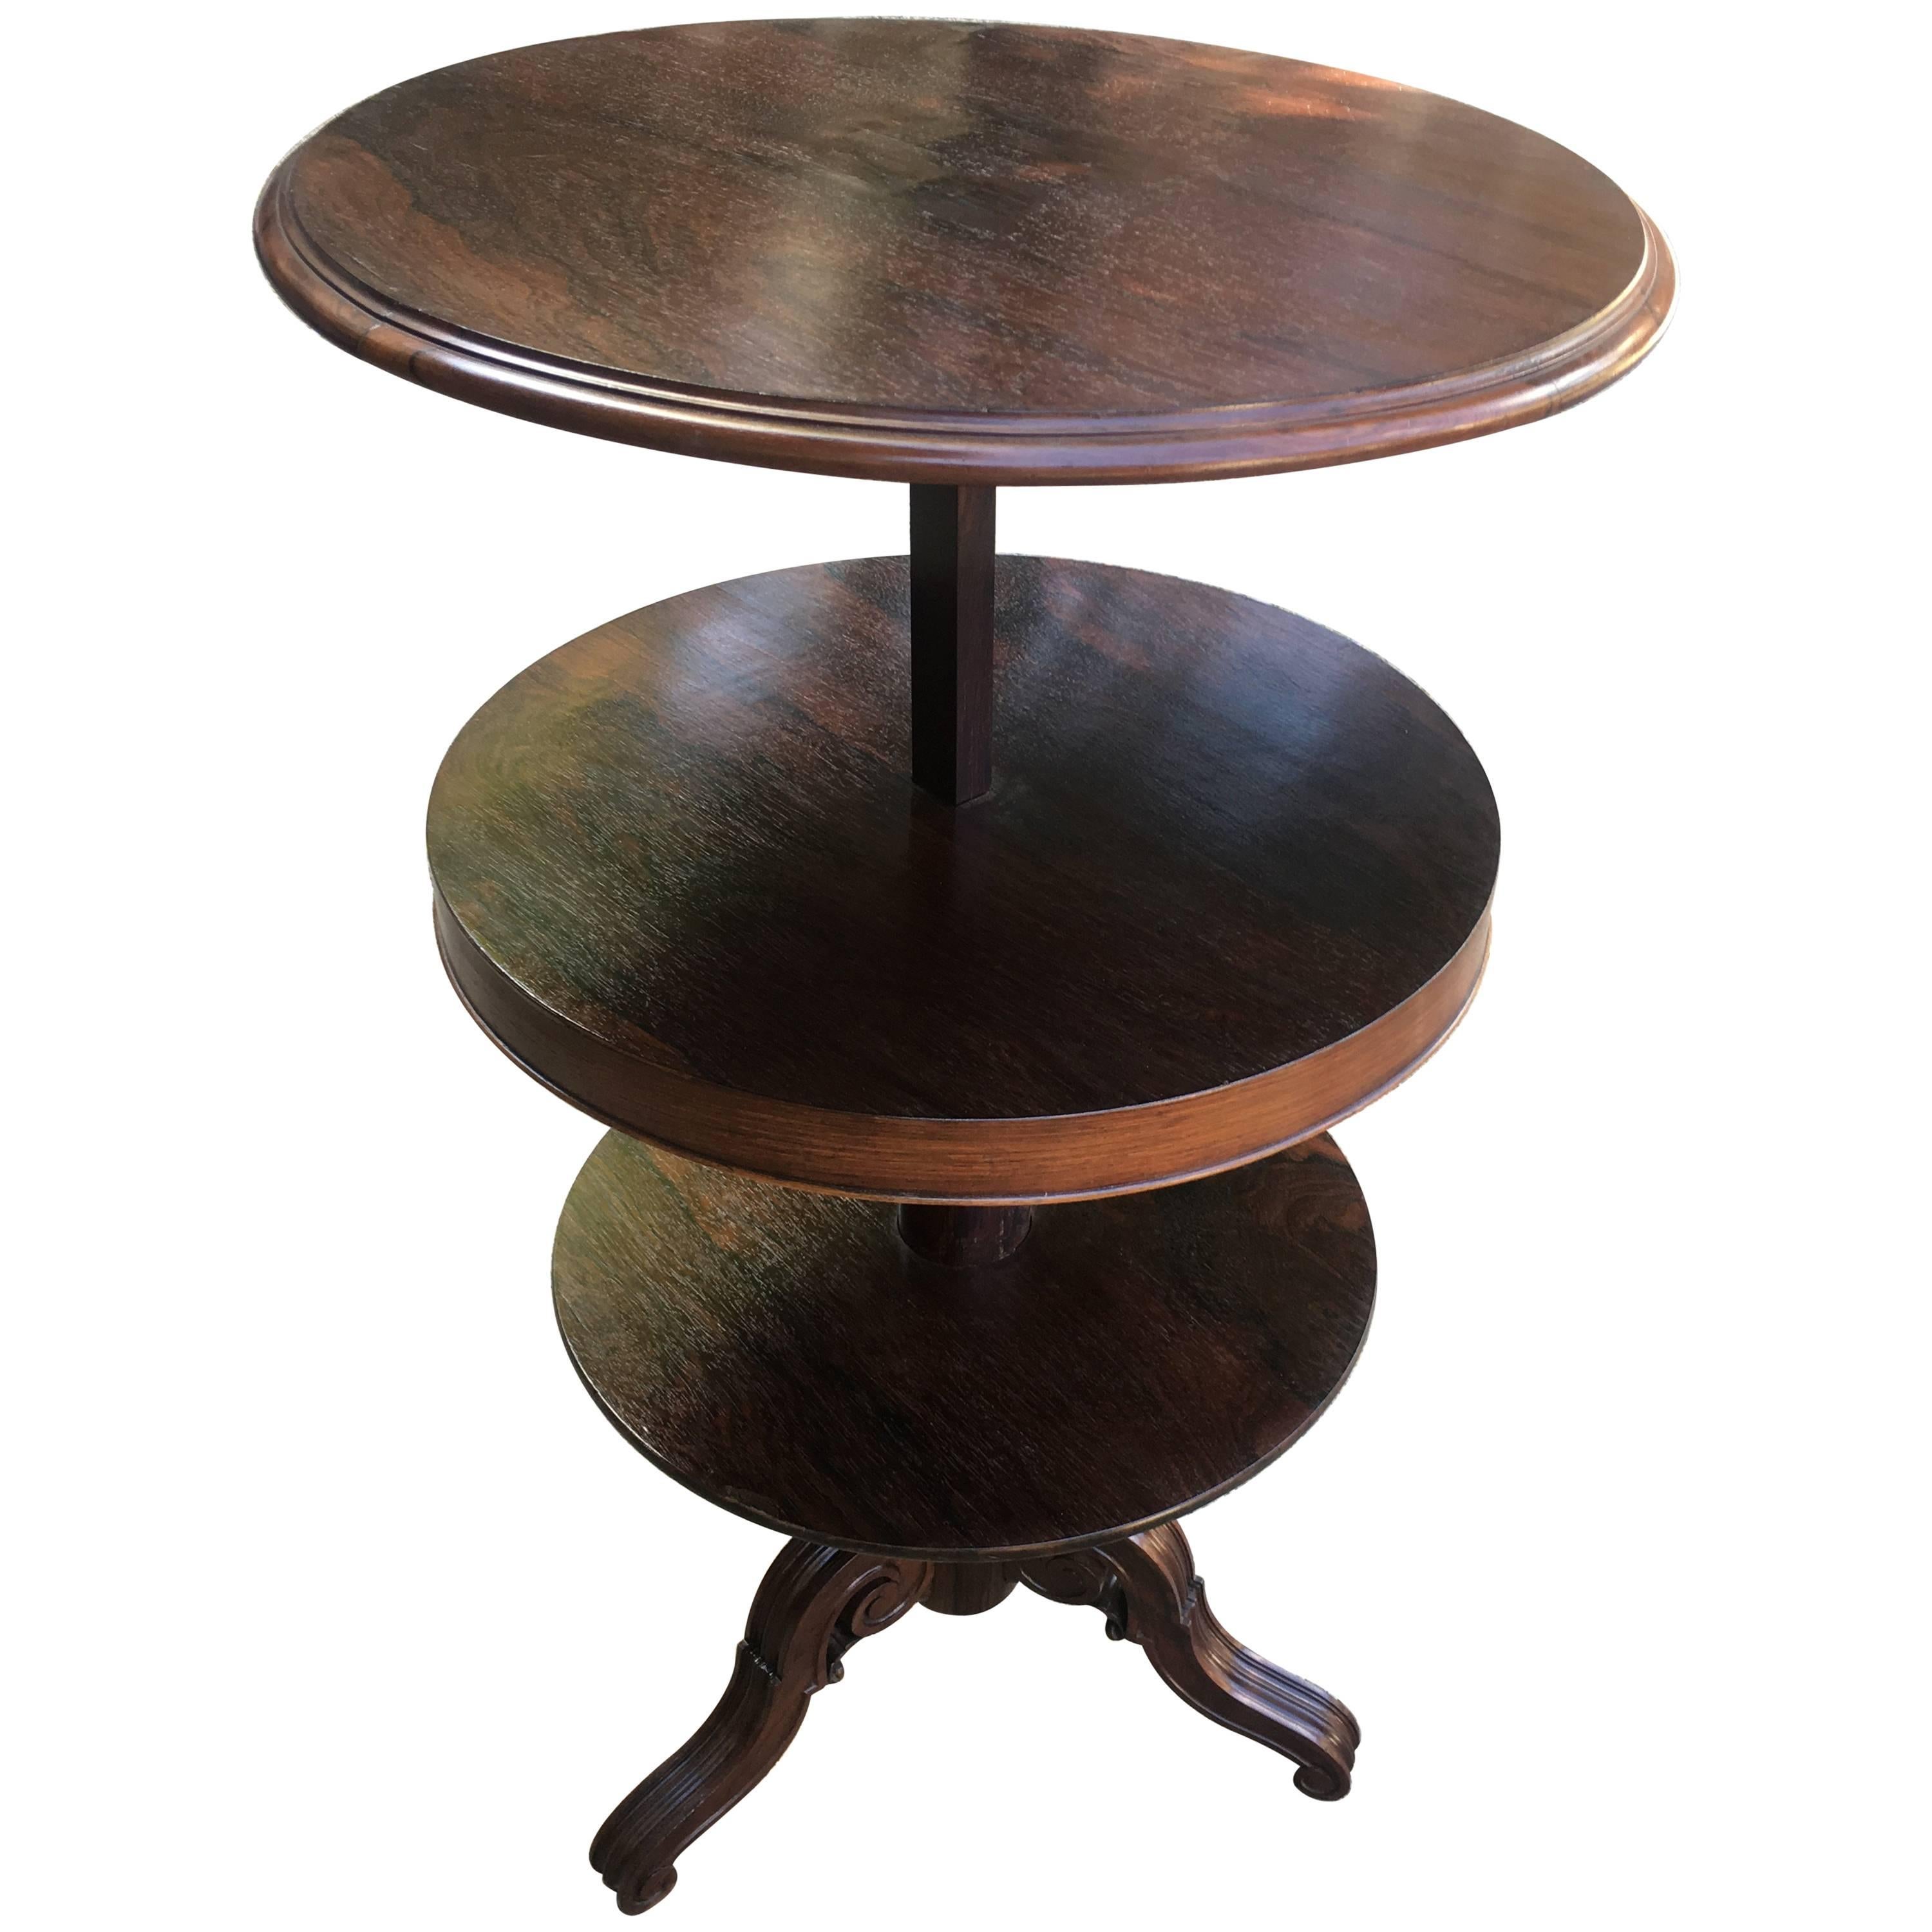 English Rosewood Adjustable Round Etagere or Shelves from 1850s For Sale